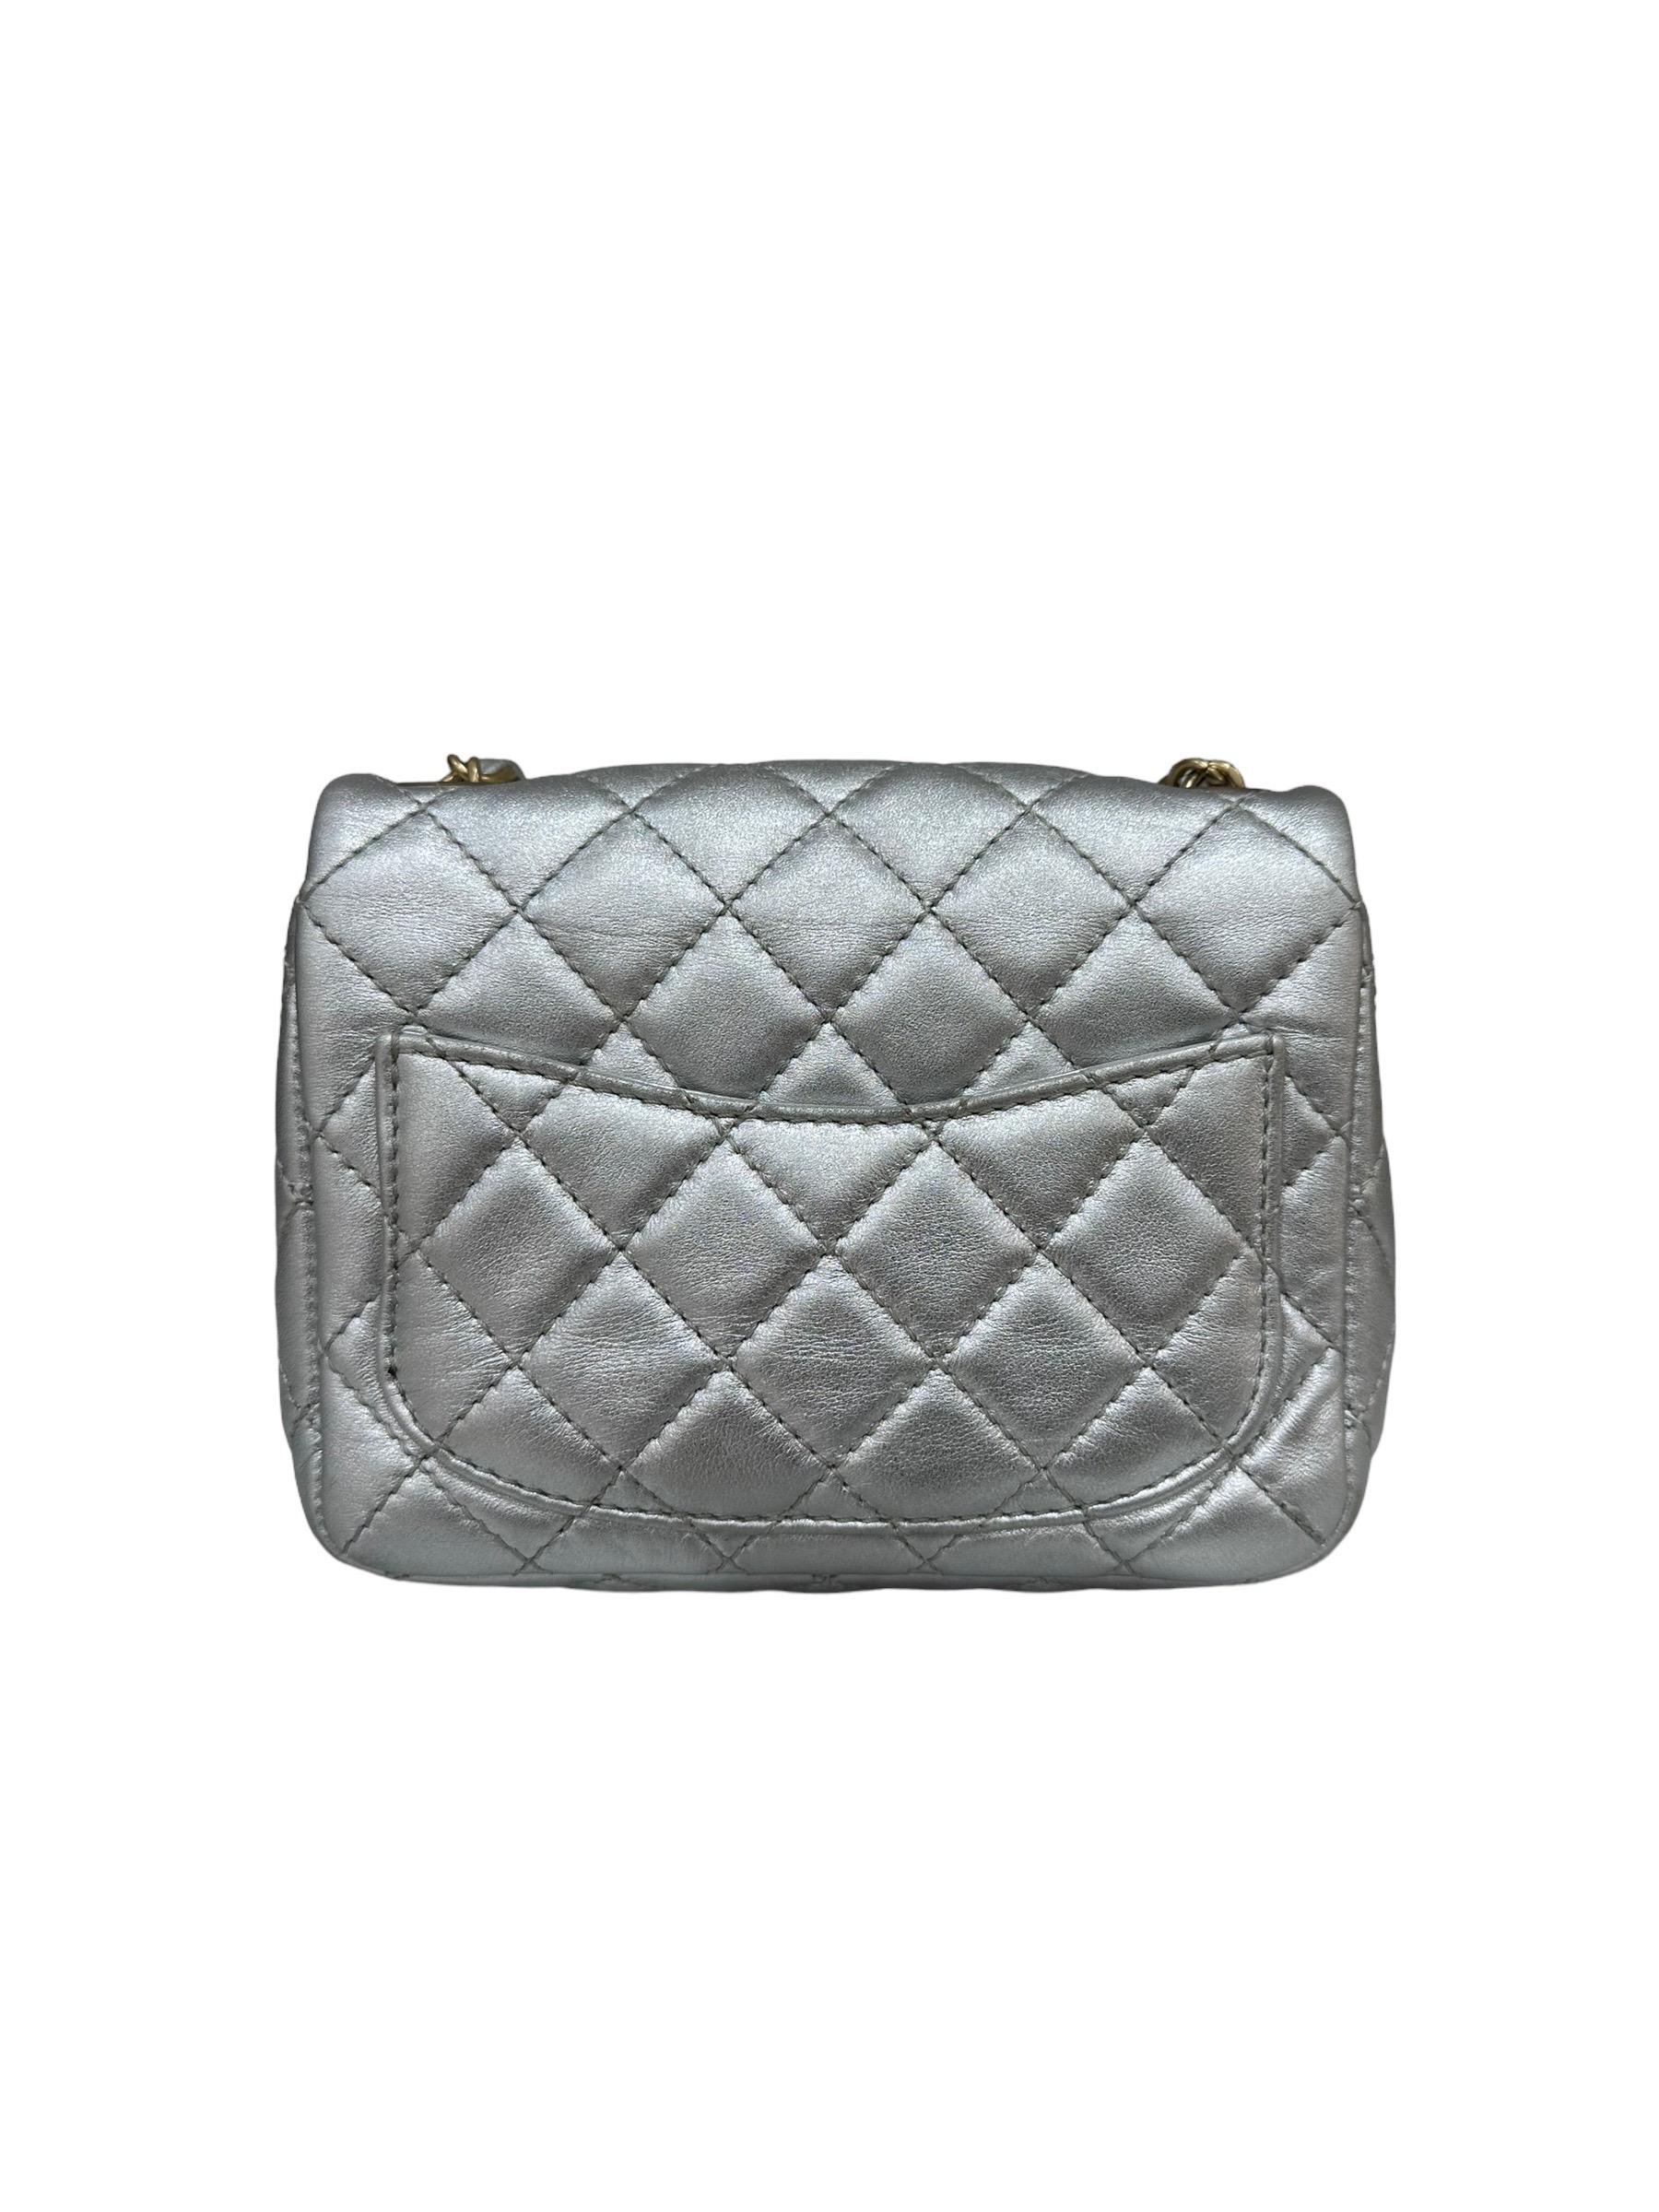 2009 Chanel Timeless Mini Flap Silver Leather  2